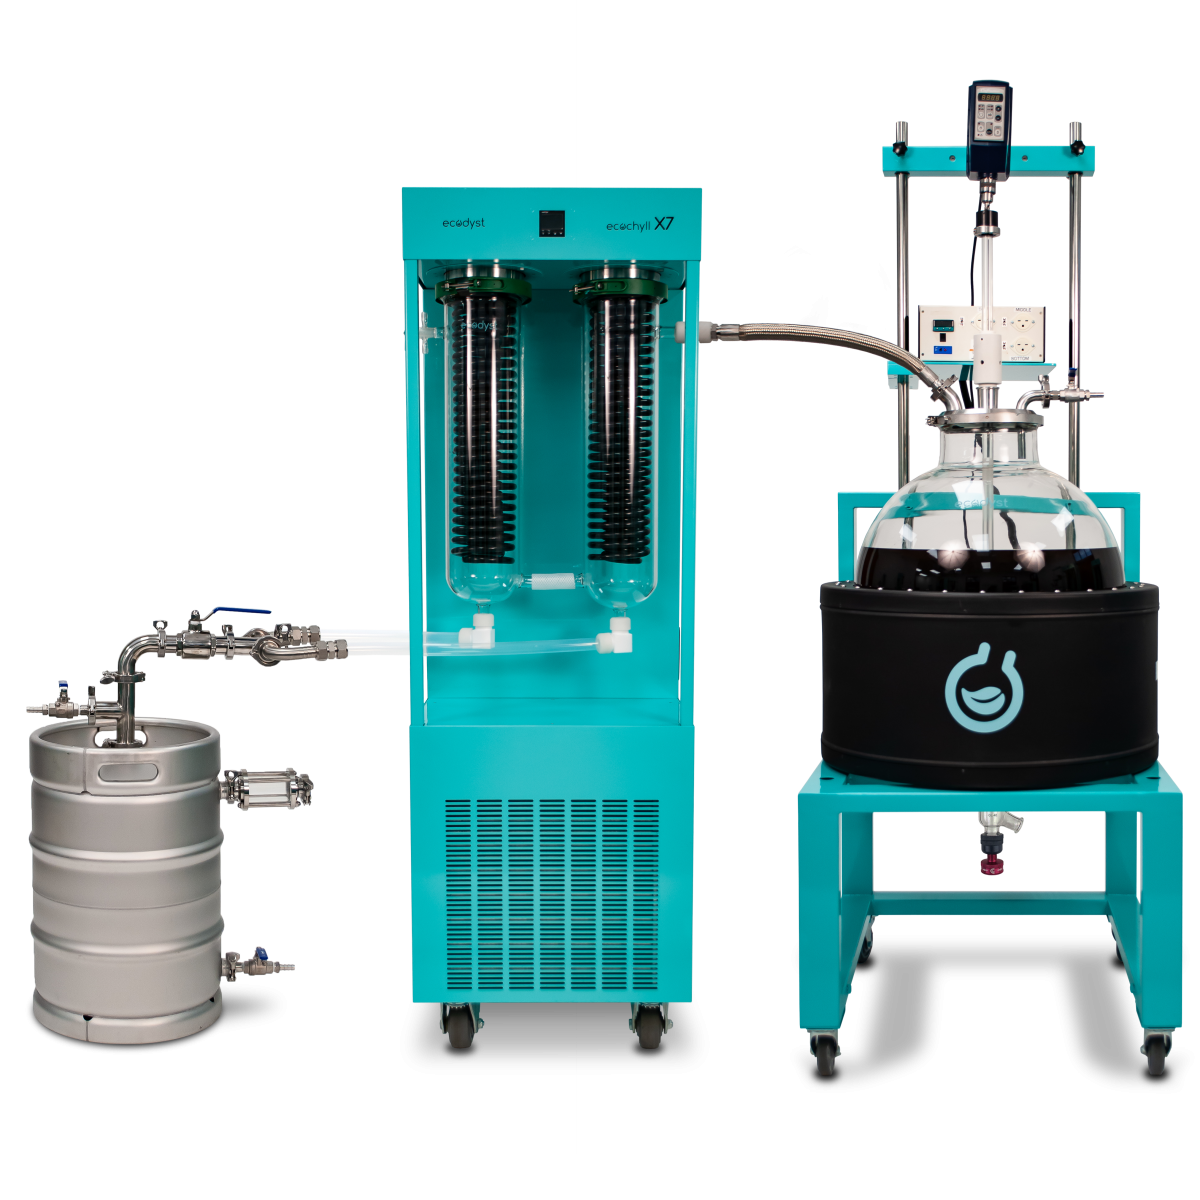 IGZ Instruments, Ecodyst Benchtop and Large Scale